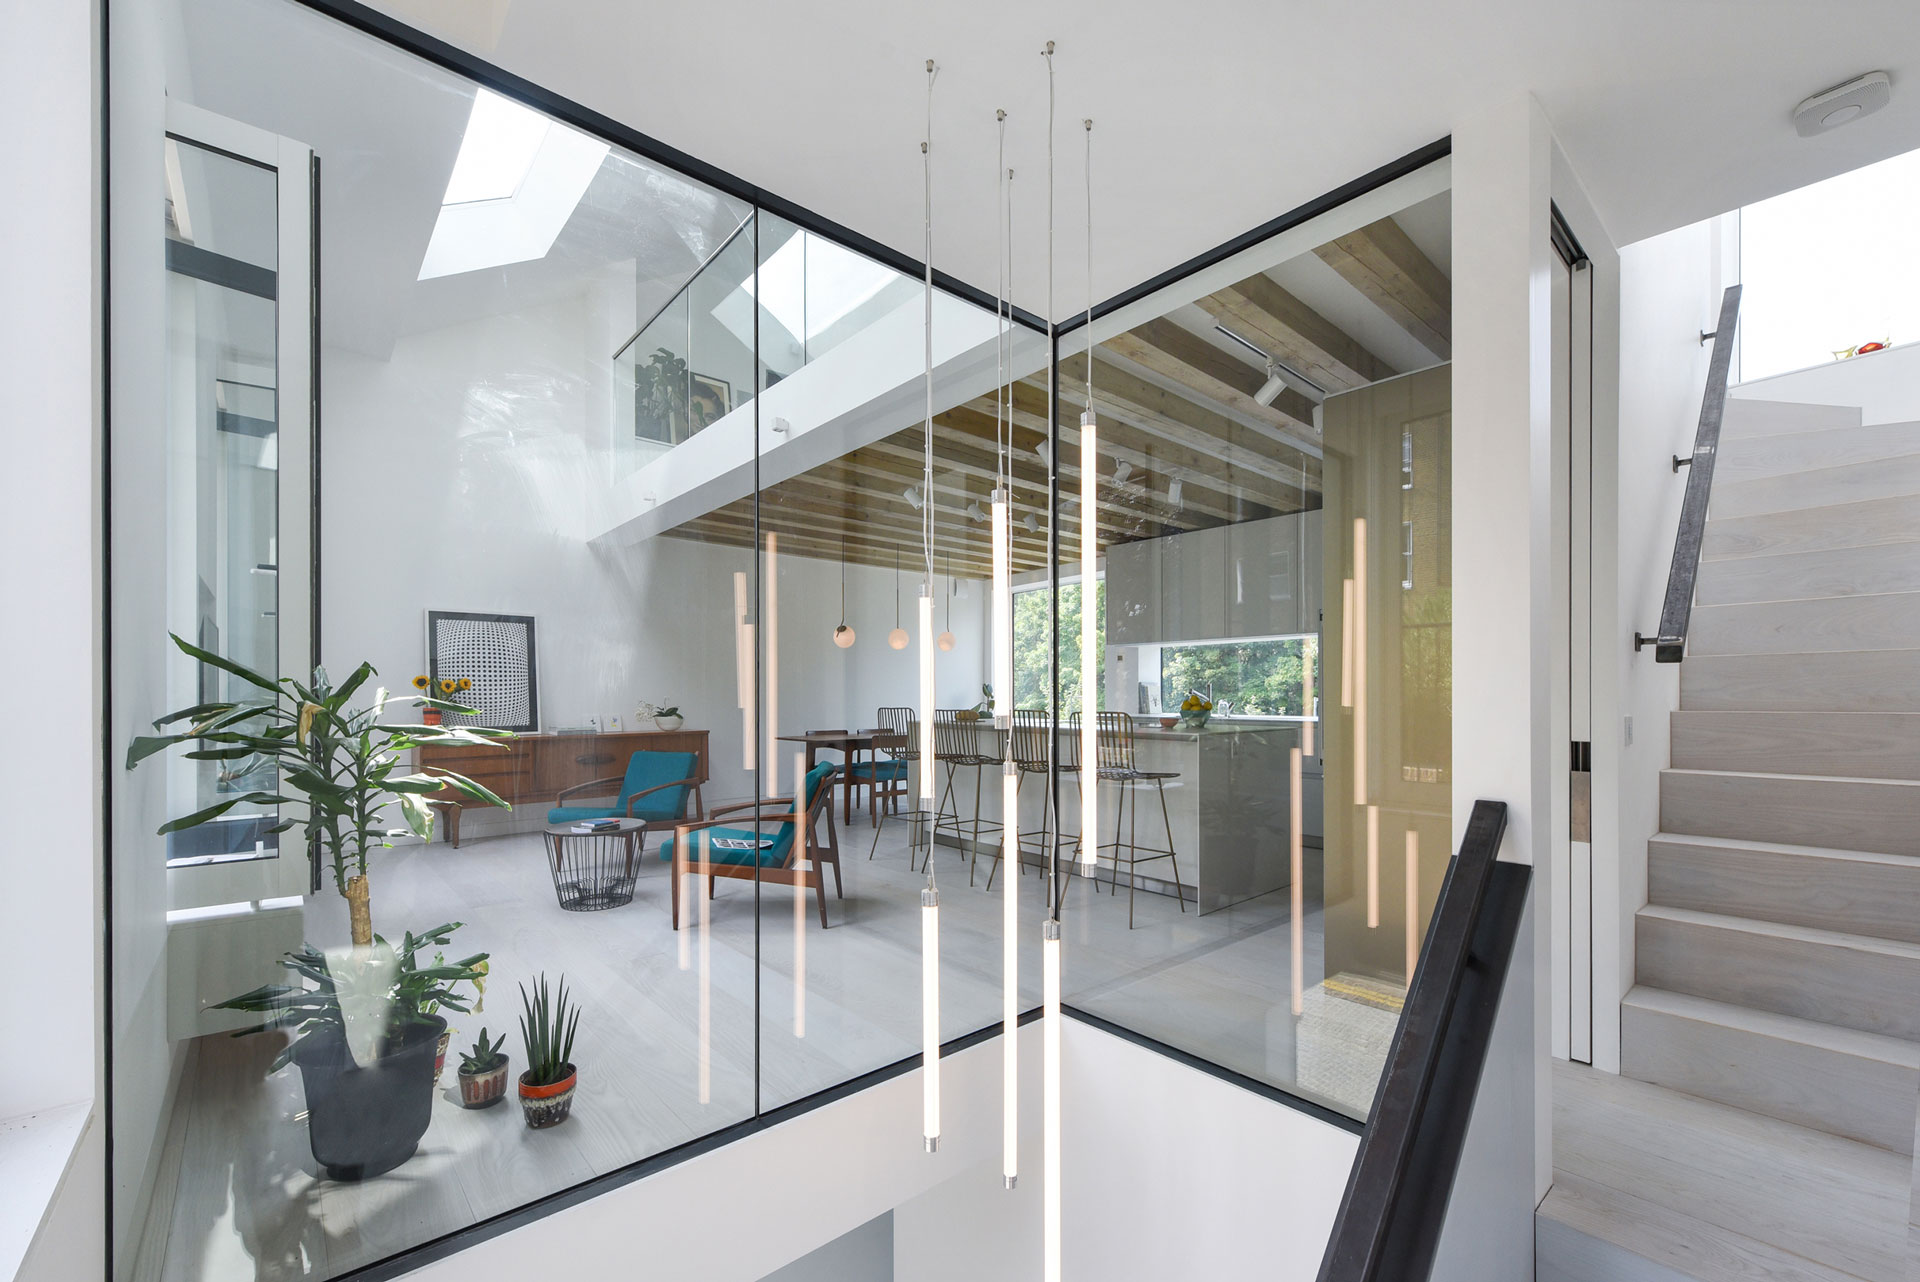 </p> <p>Find your ideal home design pro on designfor-me.com - get matched and see who's interested in your home project. Click image to see more inspiration from our design pros</p> <p>Design by Ian, architect from Kensington and Chelsea, London</p> <p>#architecture #homedesign #modernhomes #homeinspiration #glazing #architecturalglazing #naturallight #staircases #staircasedesign #staircaseinspiration #staircaseideas #staircasedesignideas #doubleheightspace</p> <p>